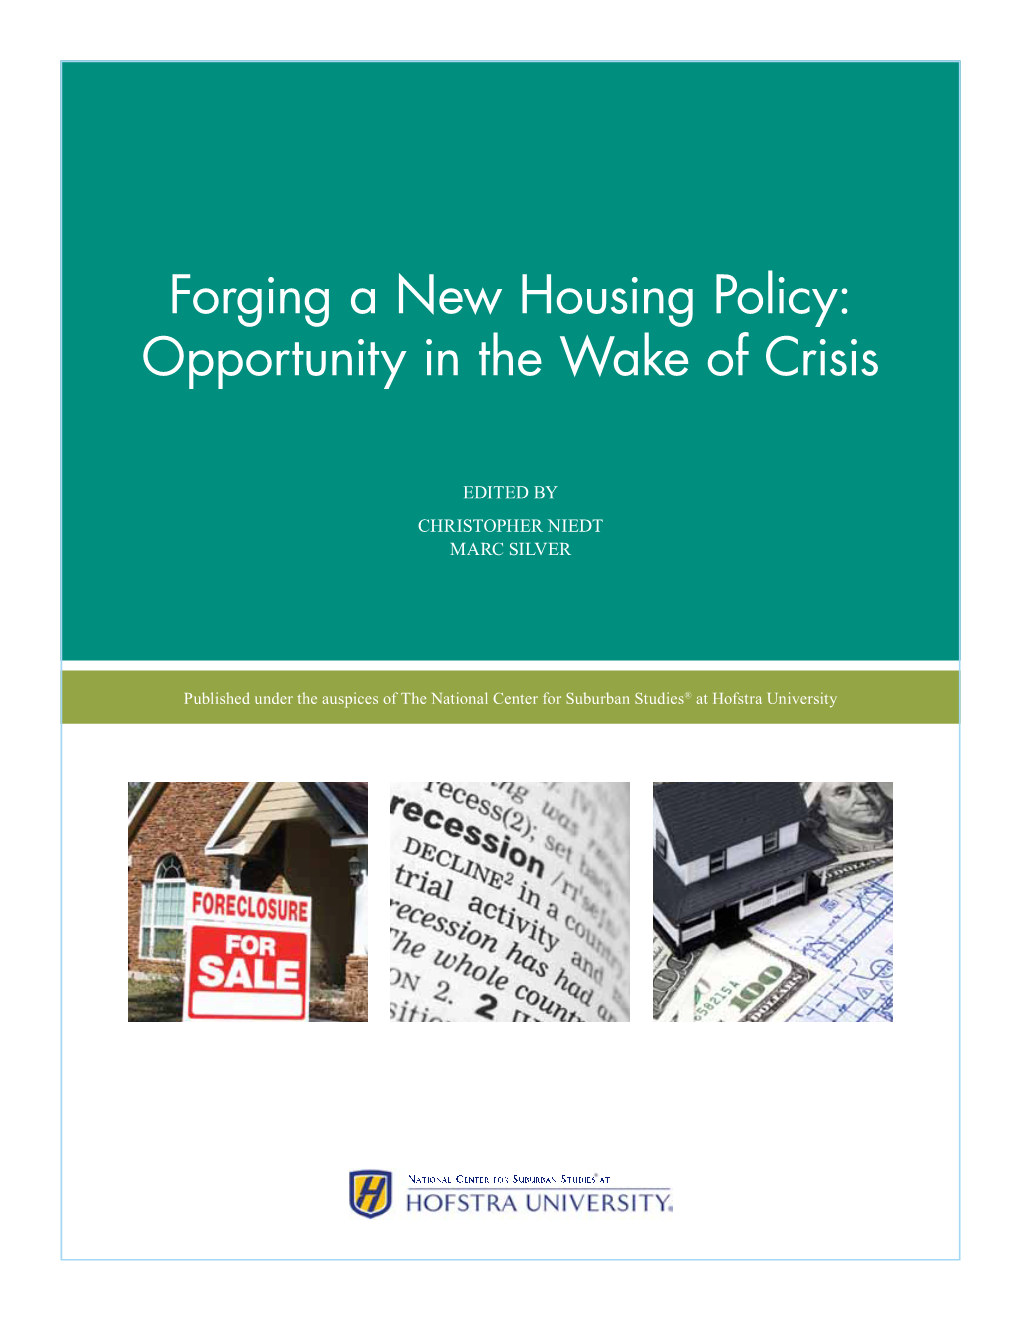 Forging a New Housing Policy: Opportunity in the Wake of Crisis